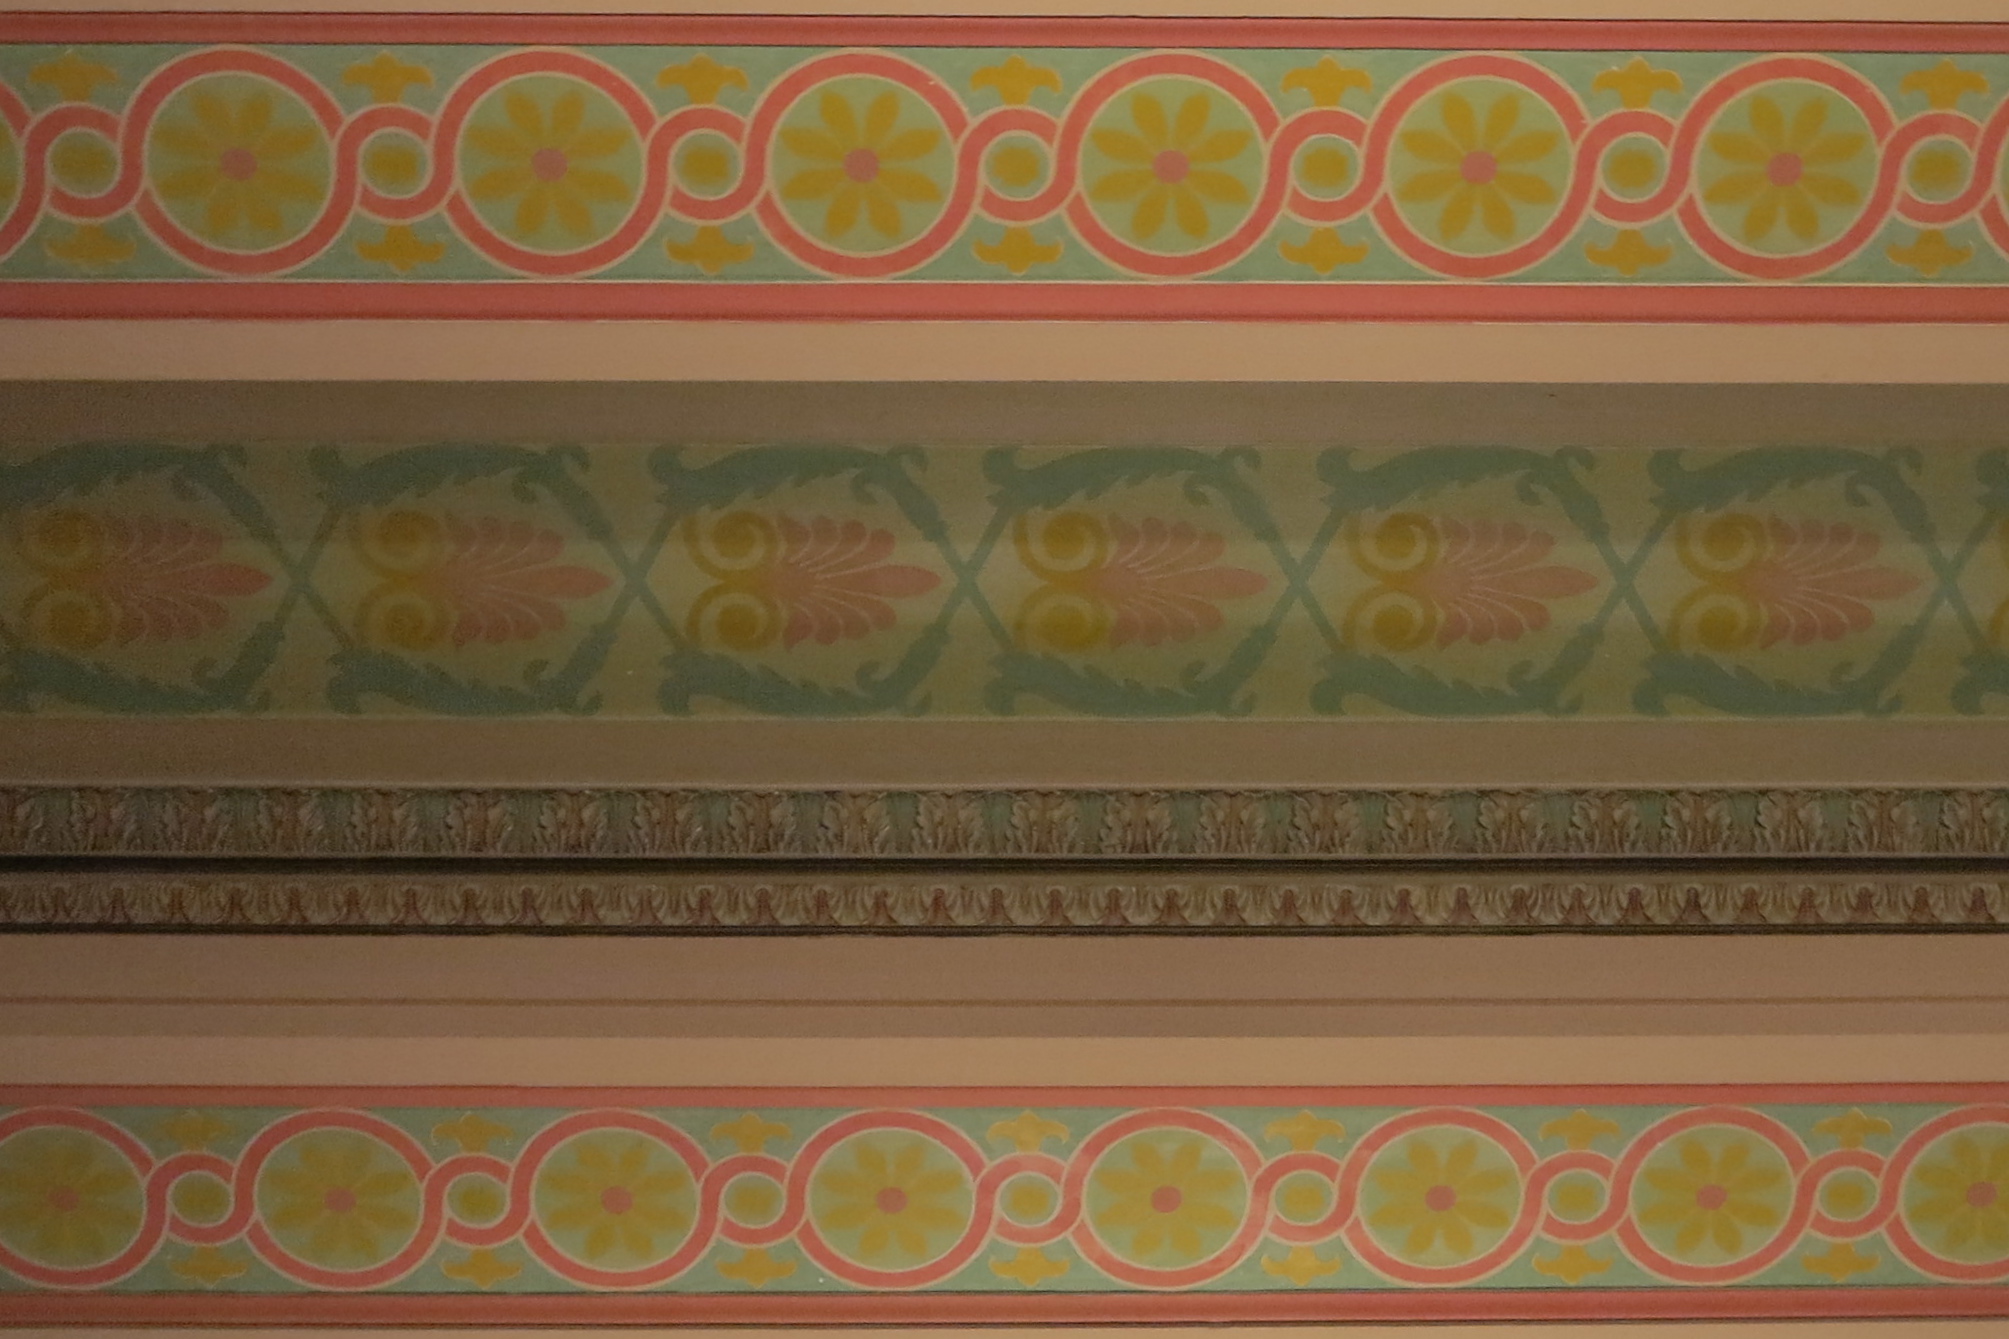 Decorative painting on beams, Family Court